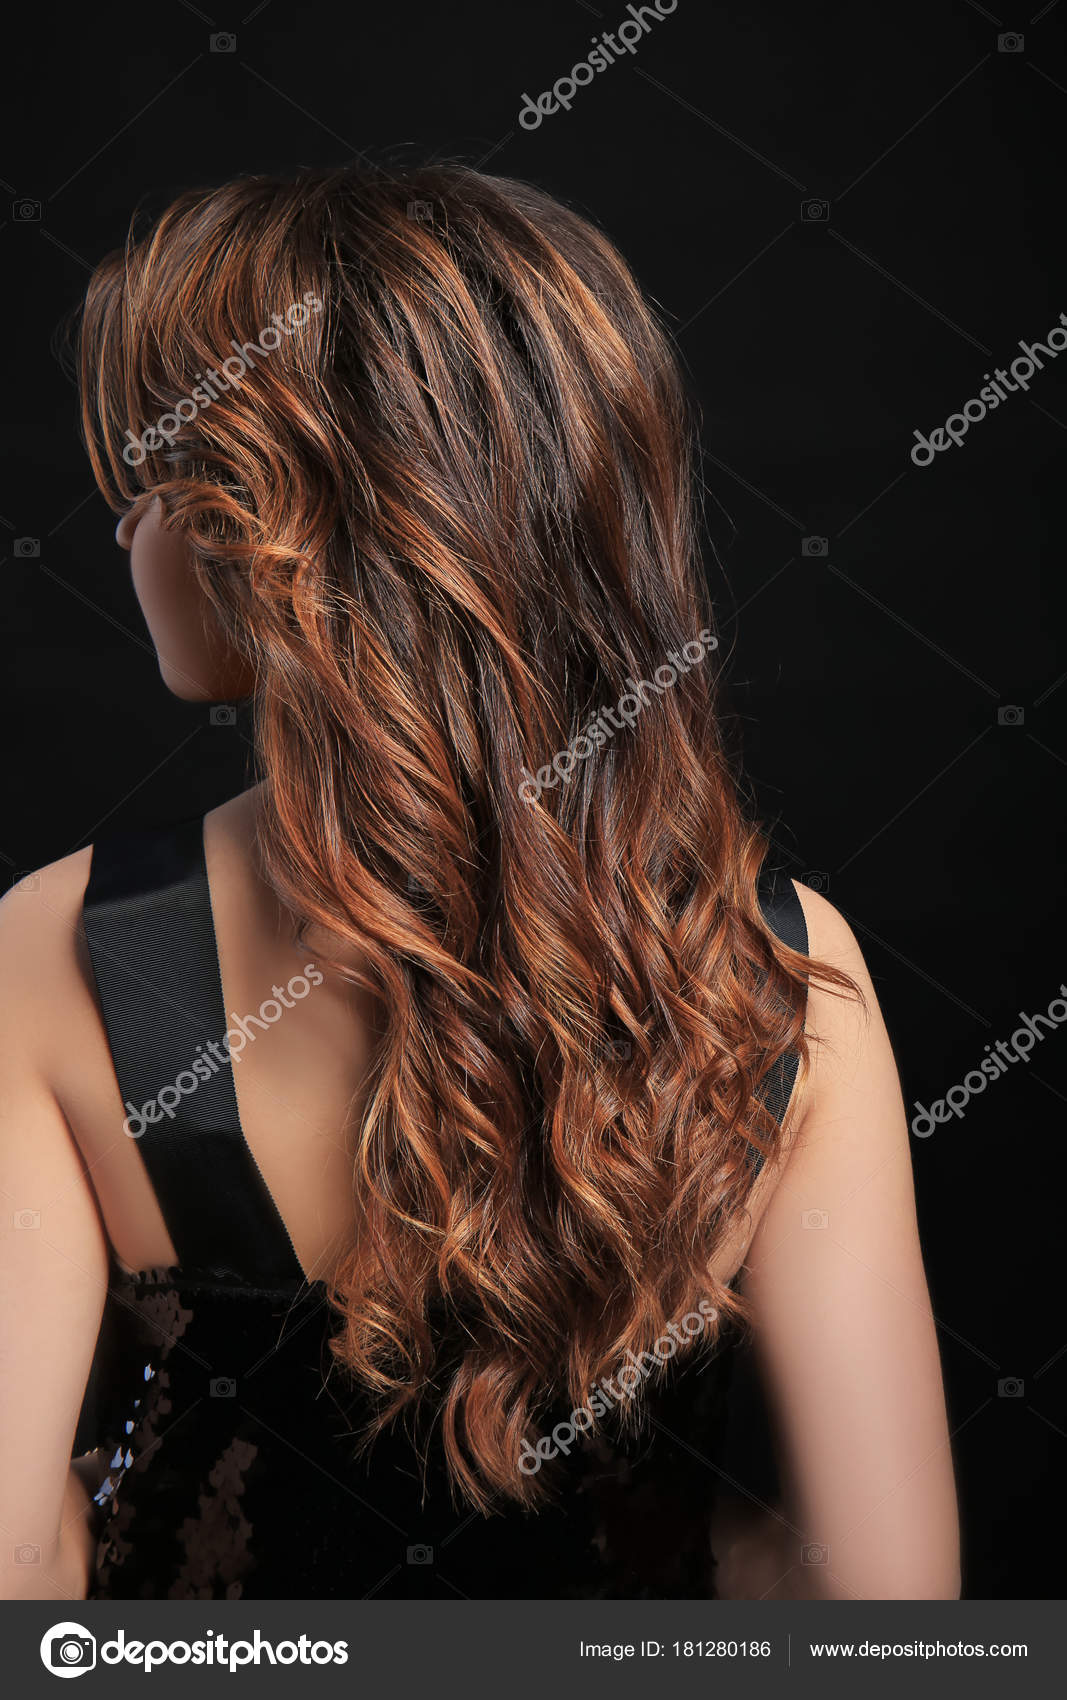 Pictures Brown Curly Hair With Caramel Highlights Woman Caramel Highlights Black Background Stock Photo C Belchonock 181280186